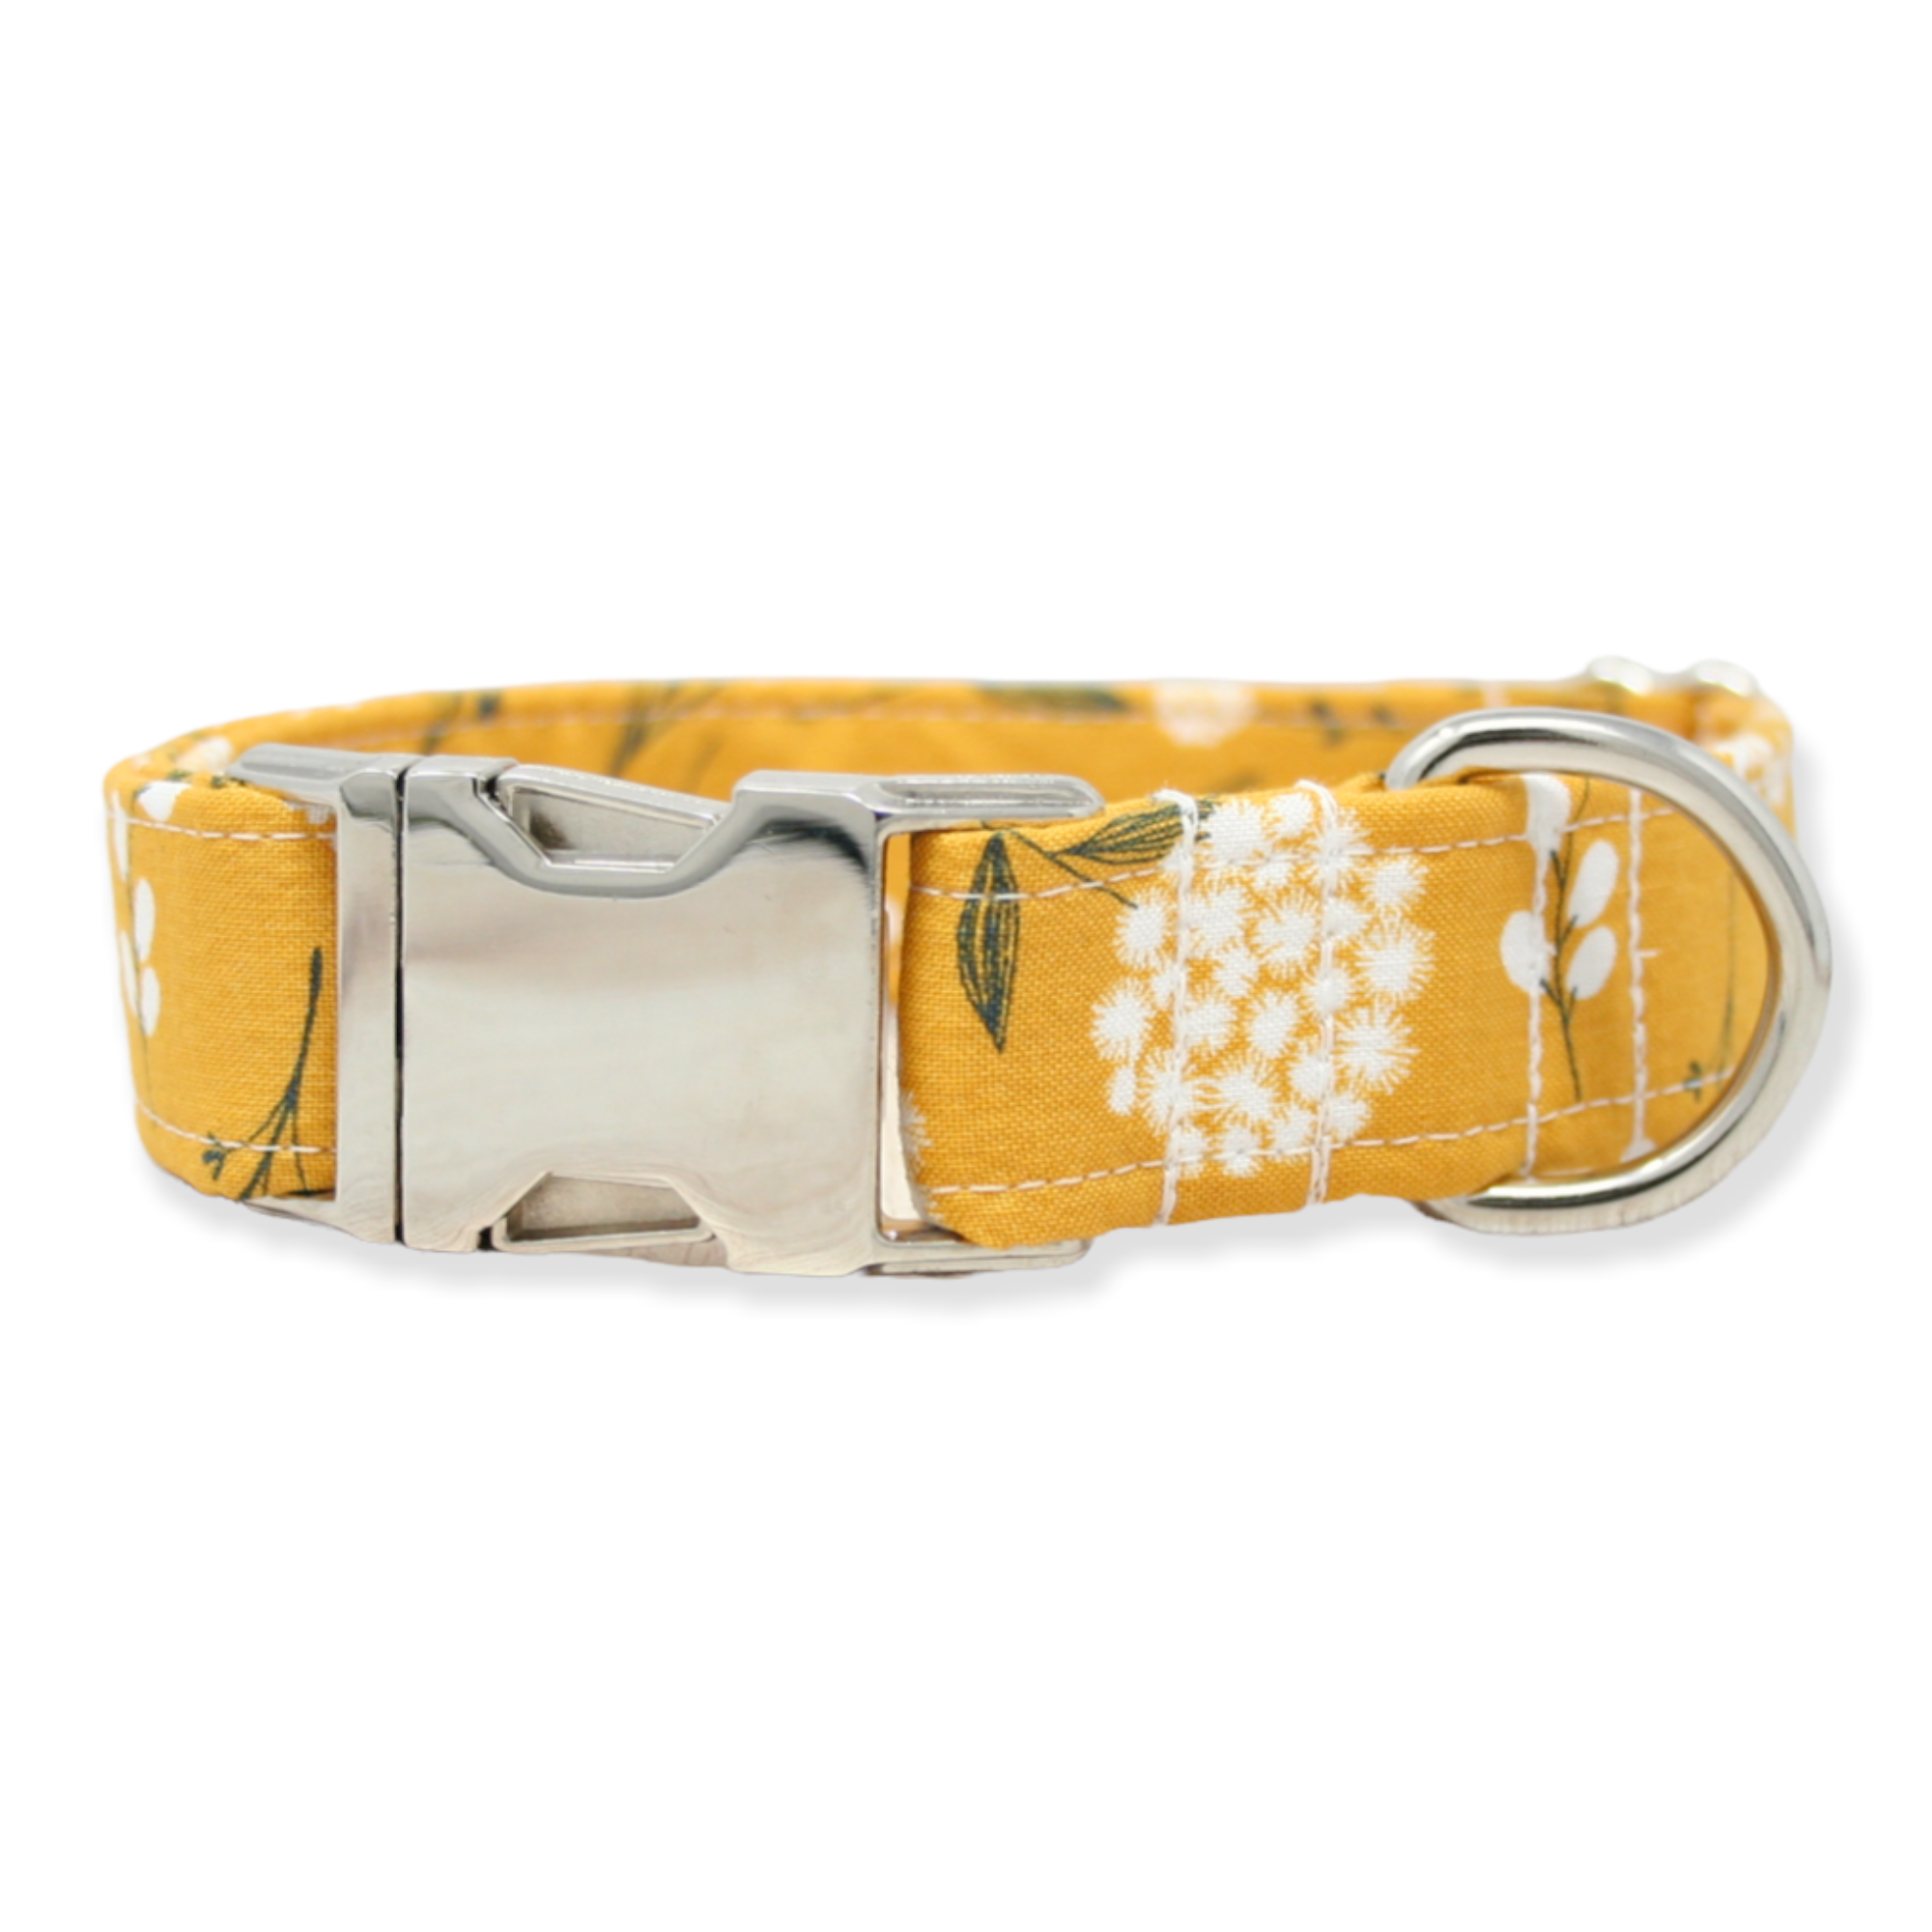 Yellow Dog Design  Dog Collars, Leashes, Harnesses & More